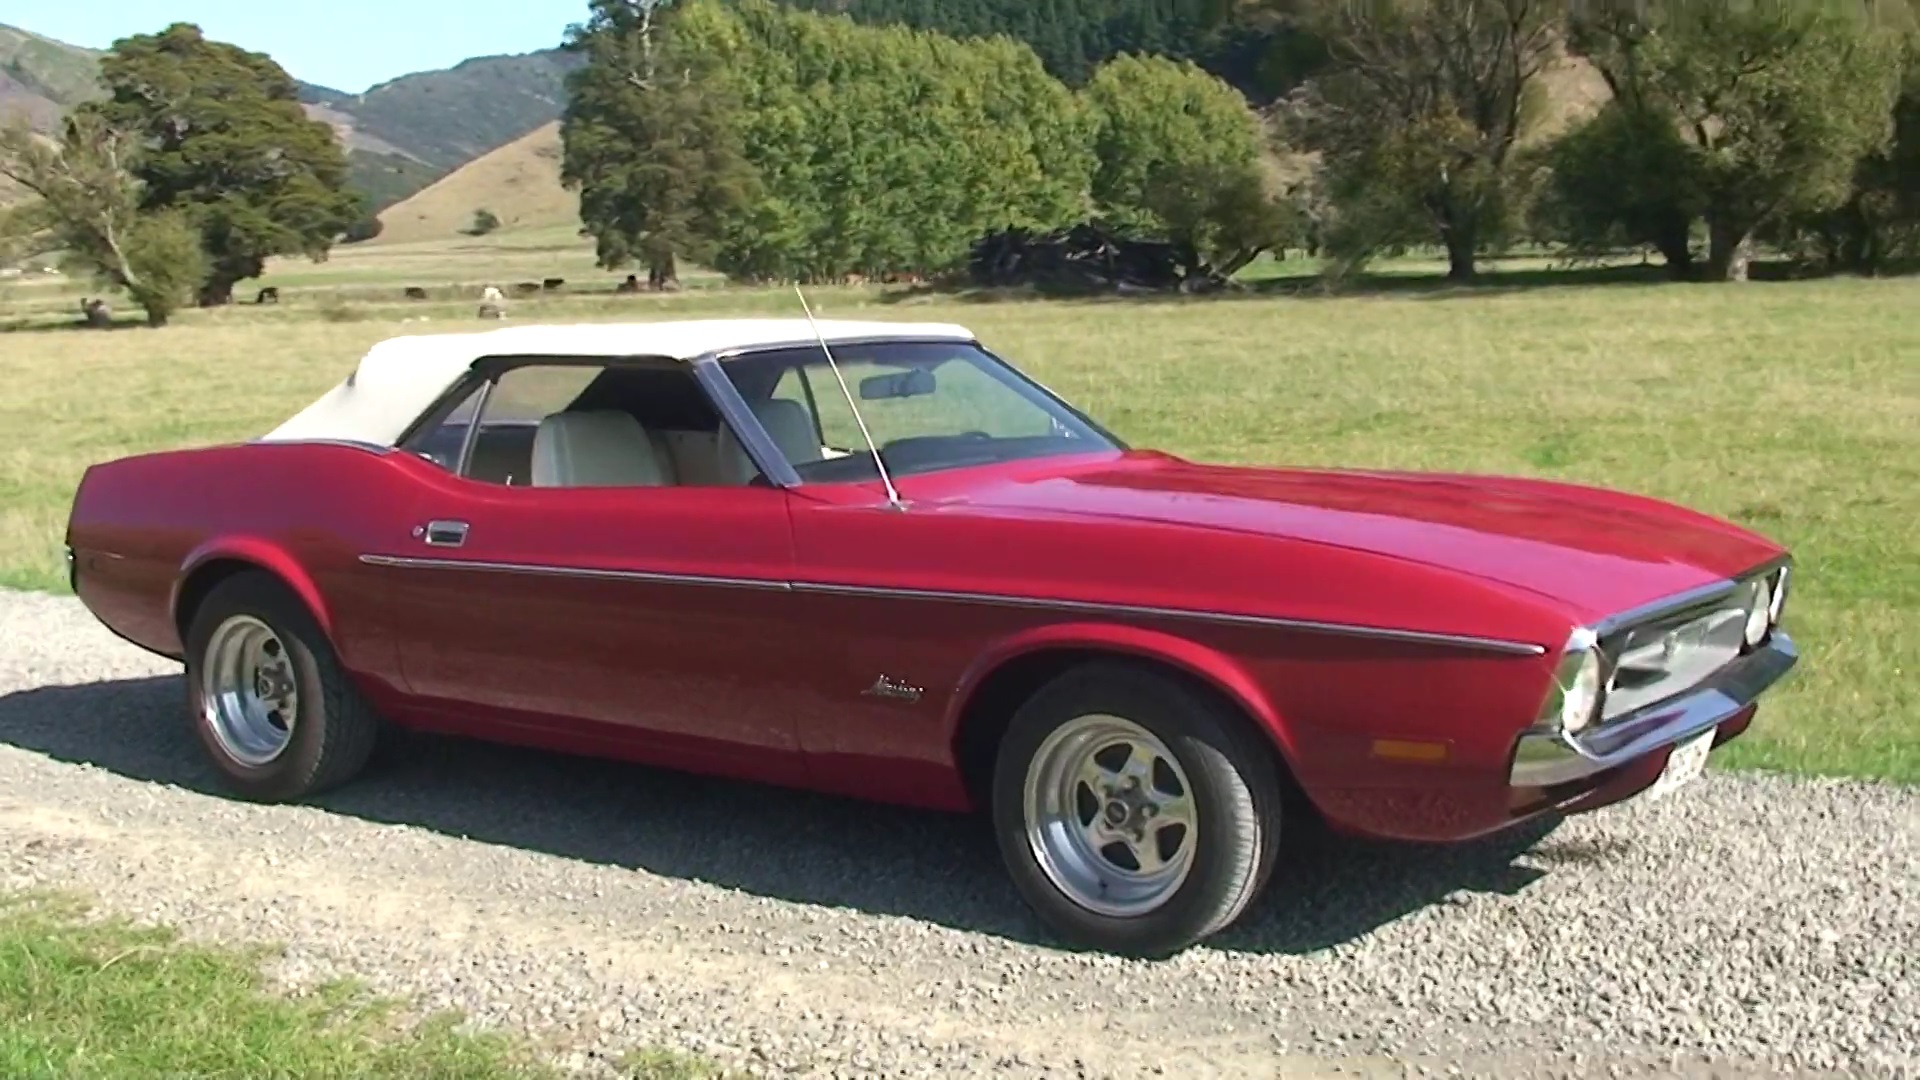 Video: 1971 Ford Mustang Convertible V8 Engine Sound